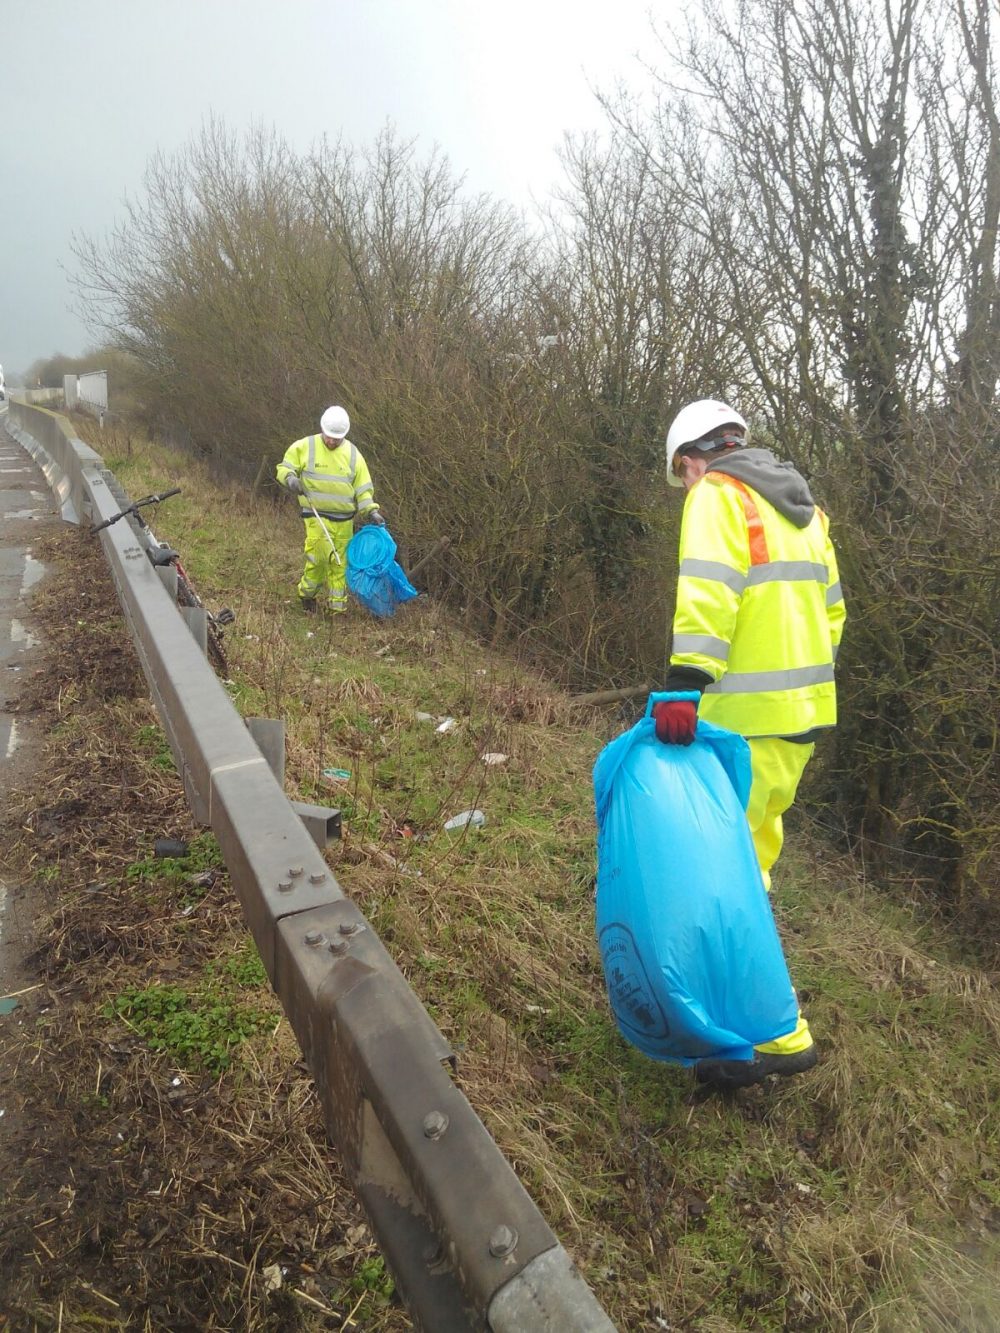 British drivers urged to clean up their act as part of a national litter campaign